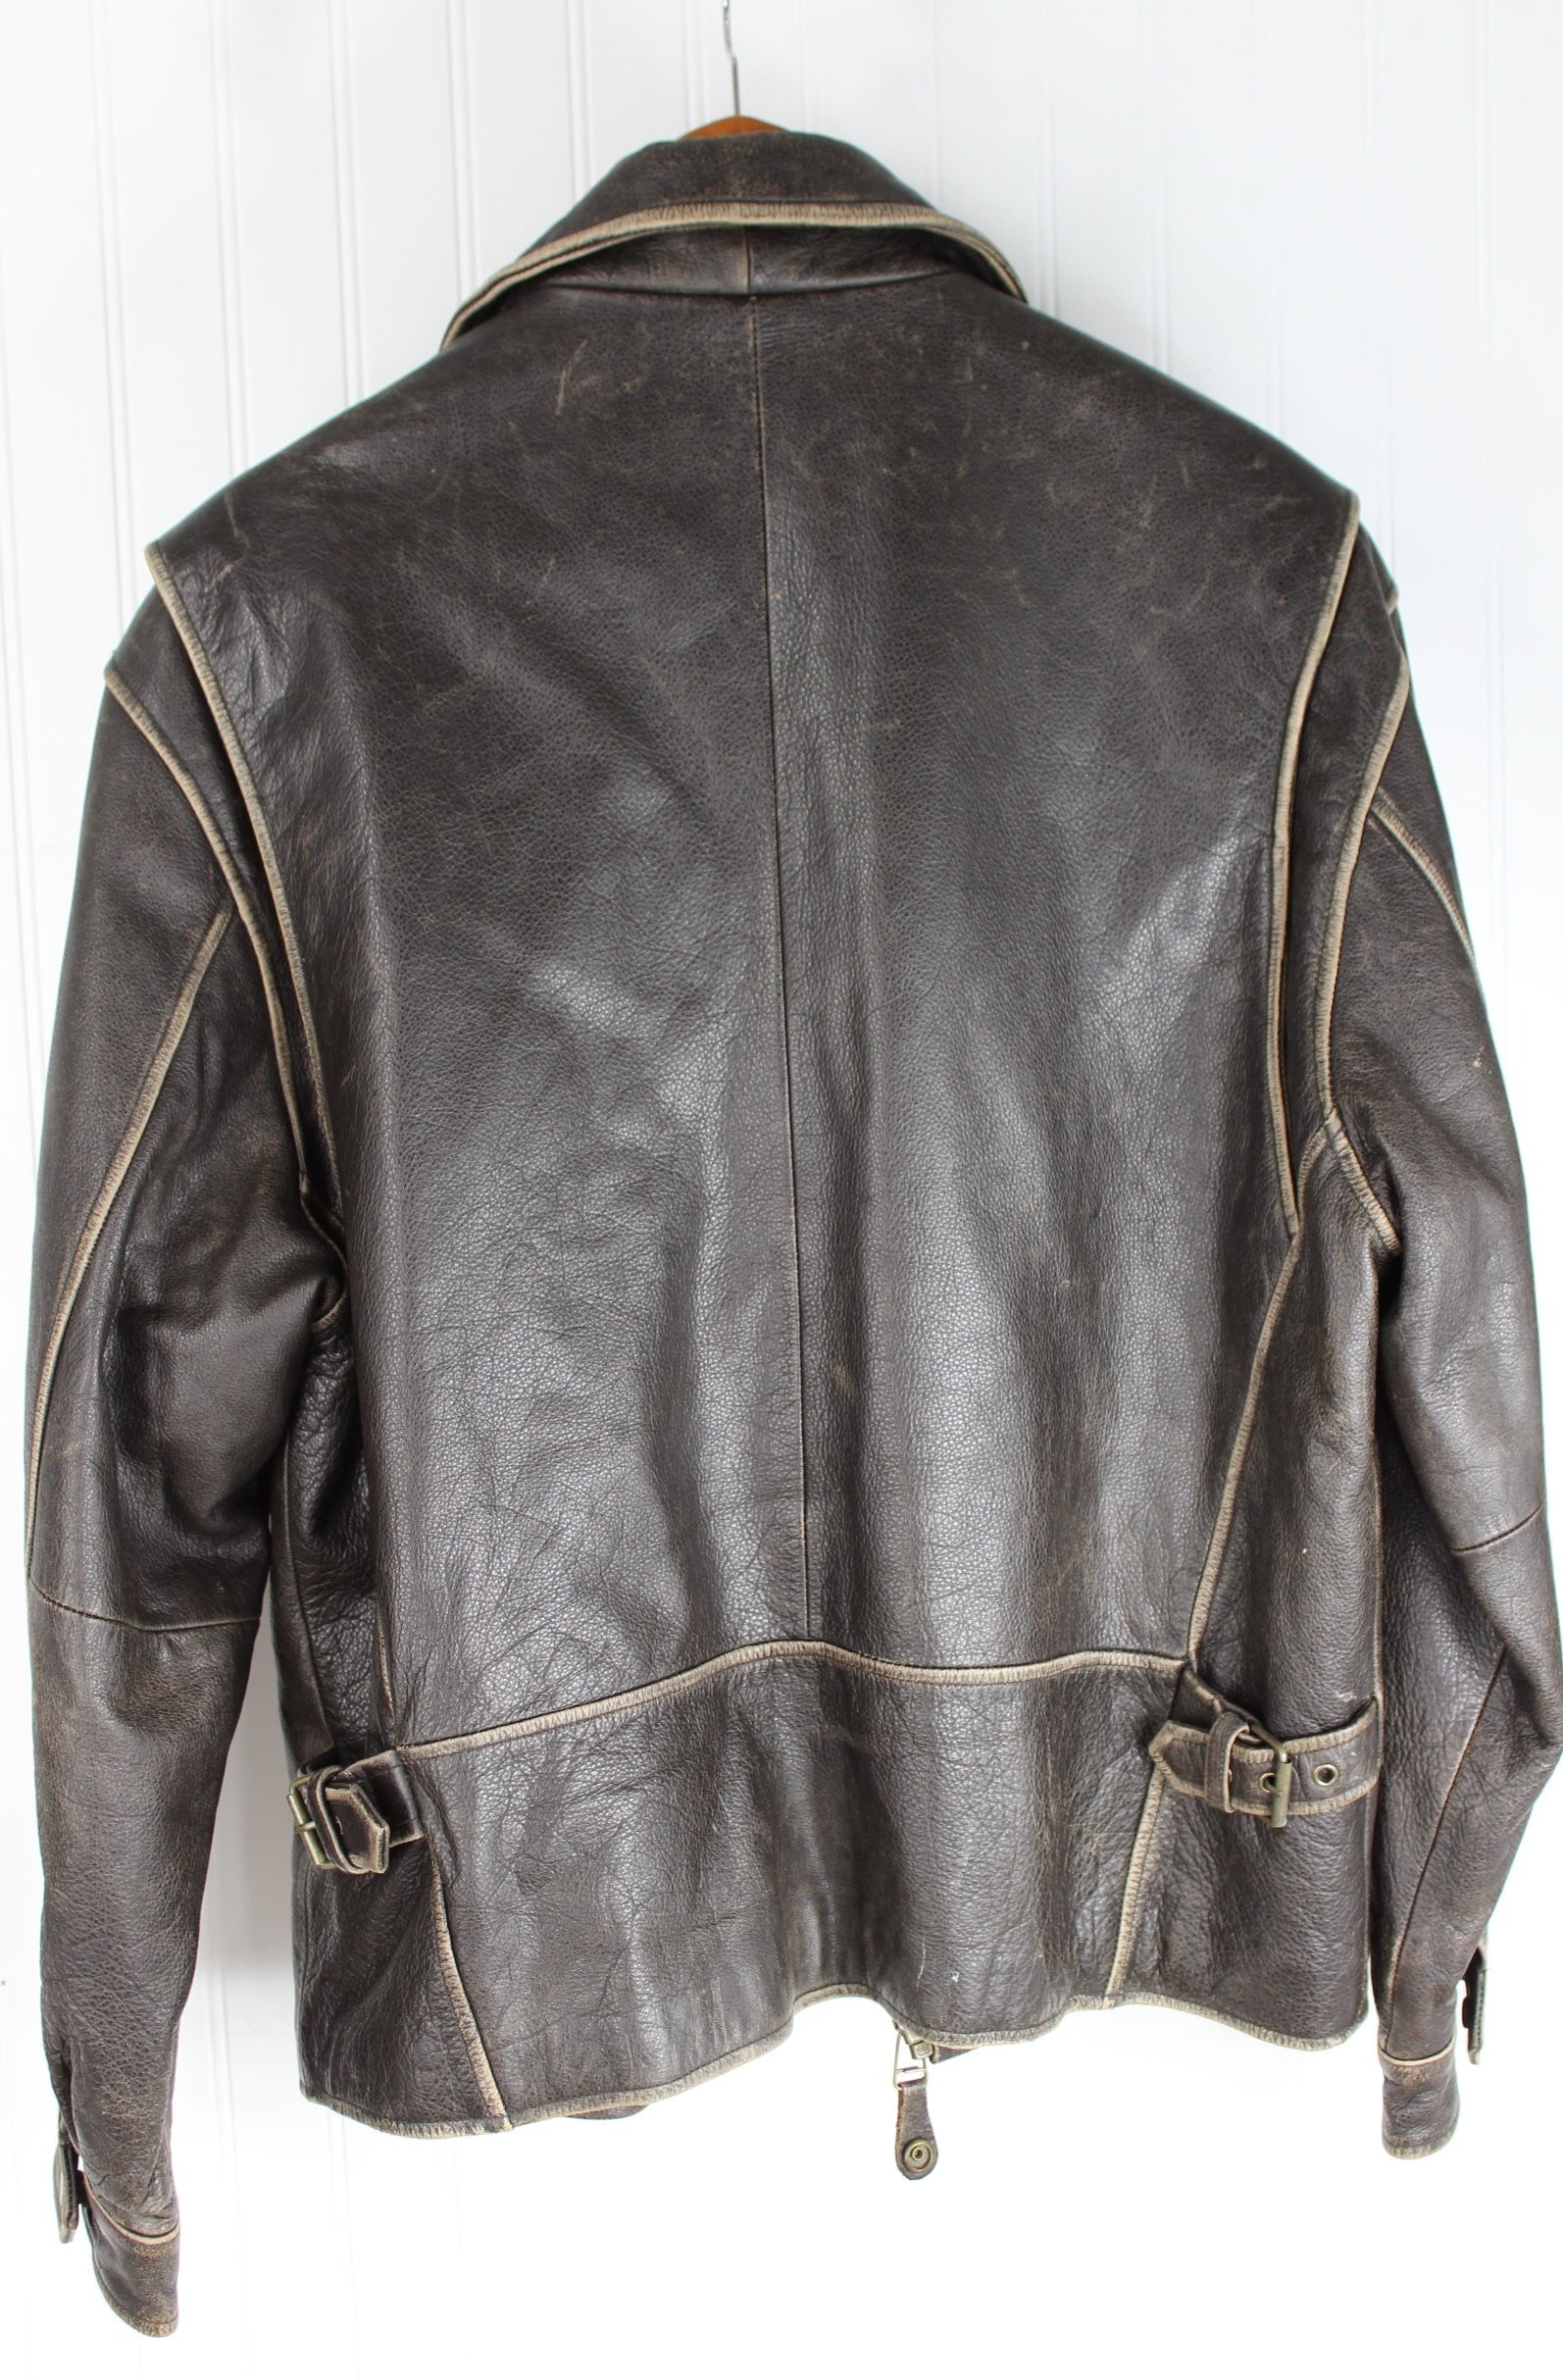 R & R Casuals Rare Distressed Leather Brown Aviator Bomber Jacket L arge Vintage belted sides